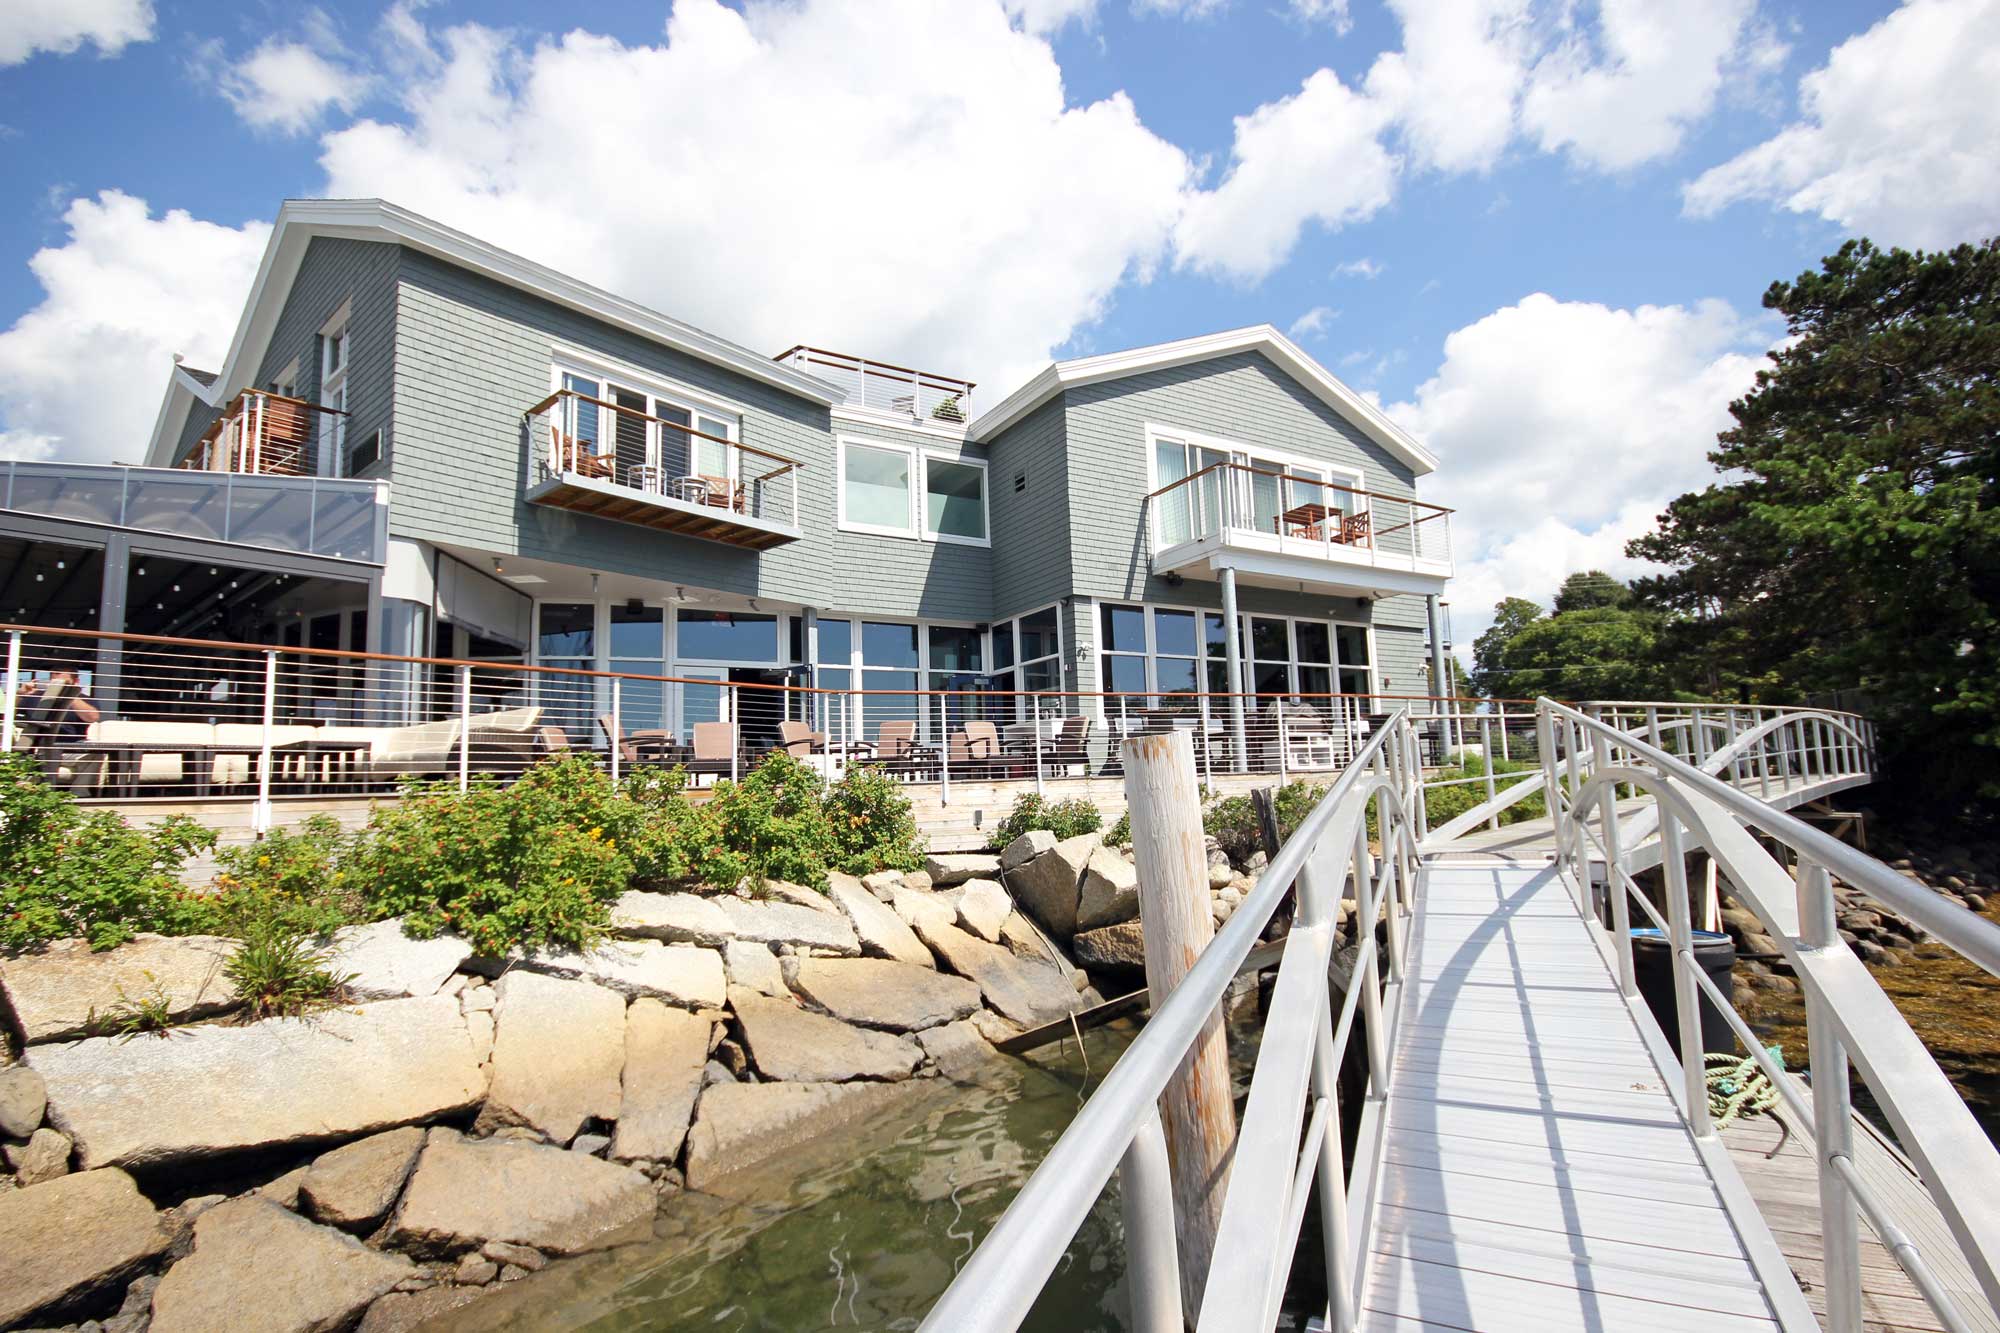 New Wedding Venues: The Boathouse Waterfront Hotel